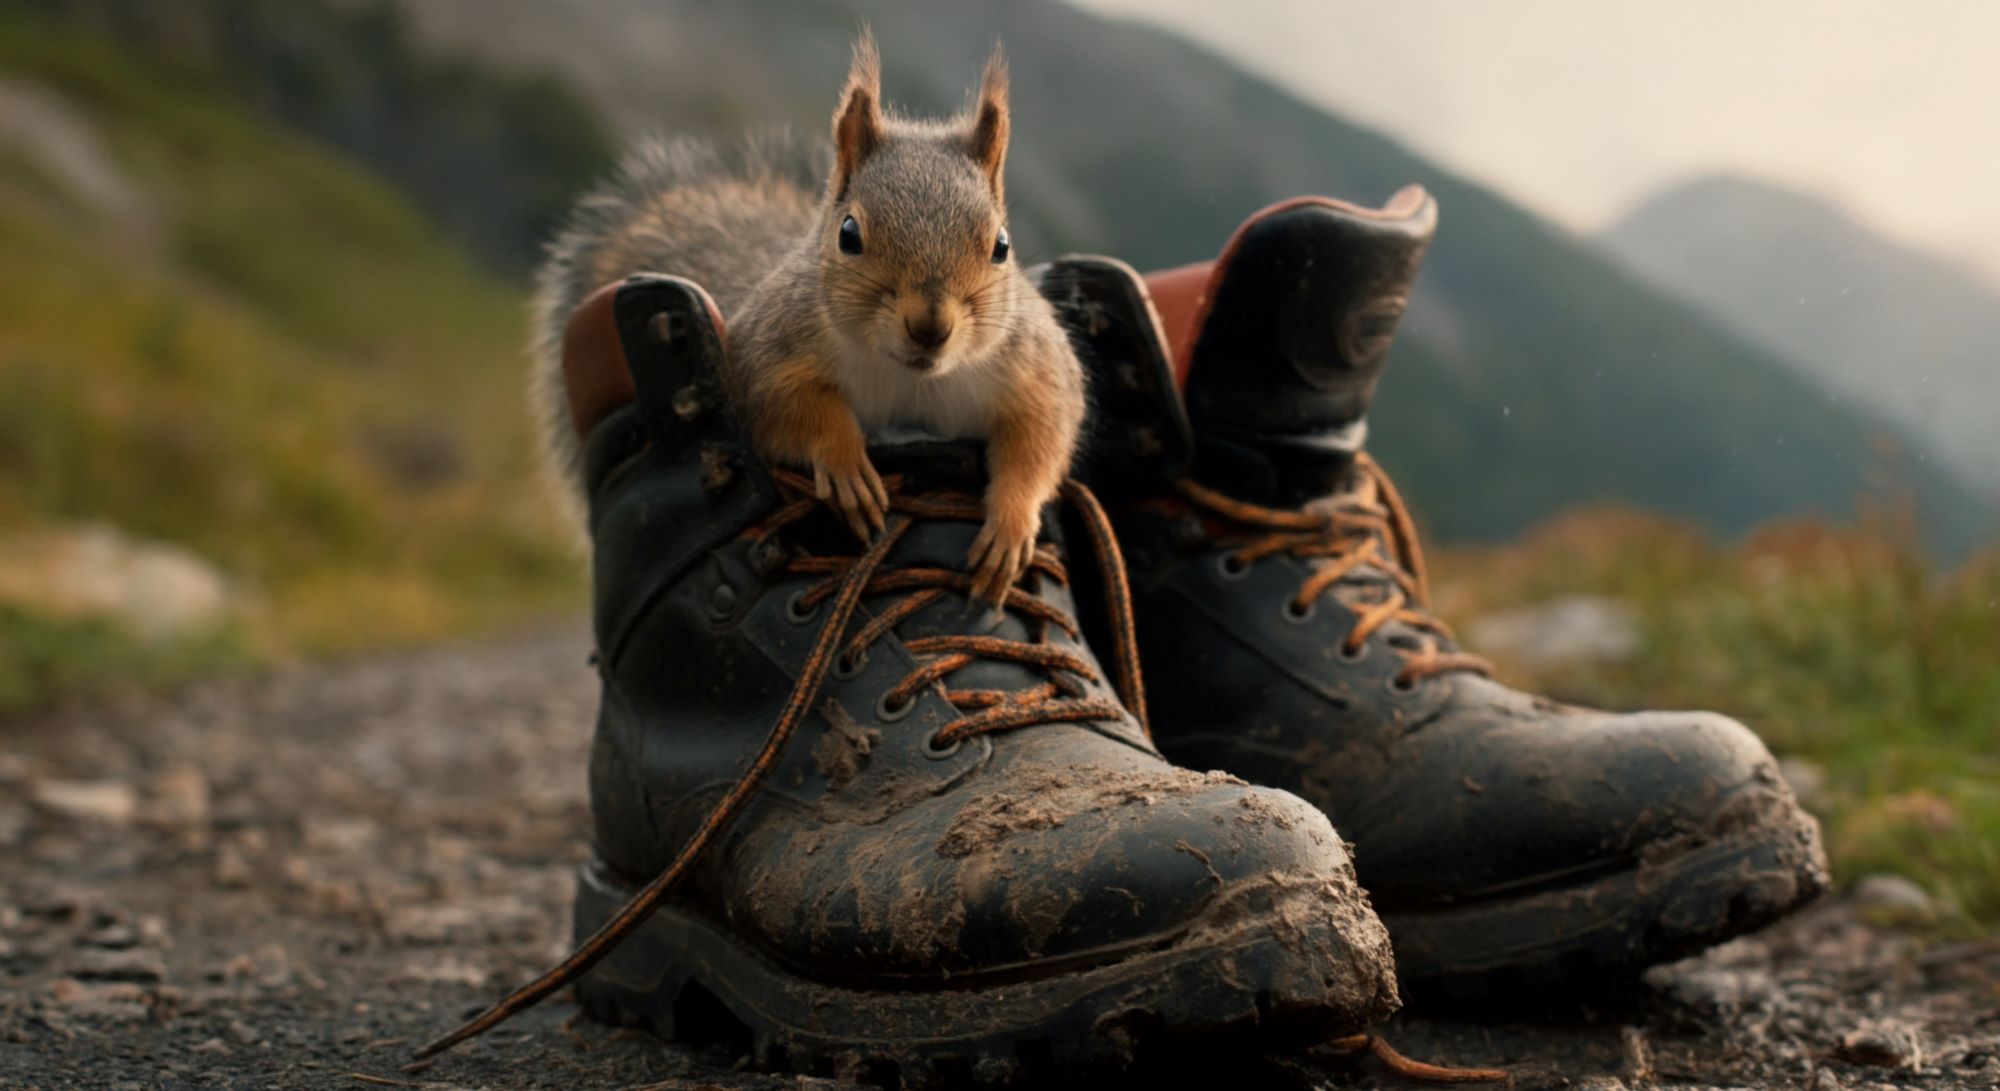 Image of a squirrel in a work boot created by Imagen 3